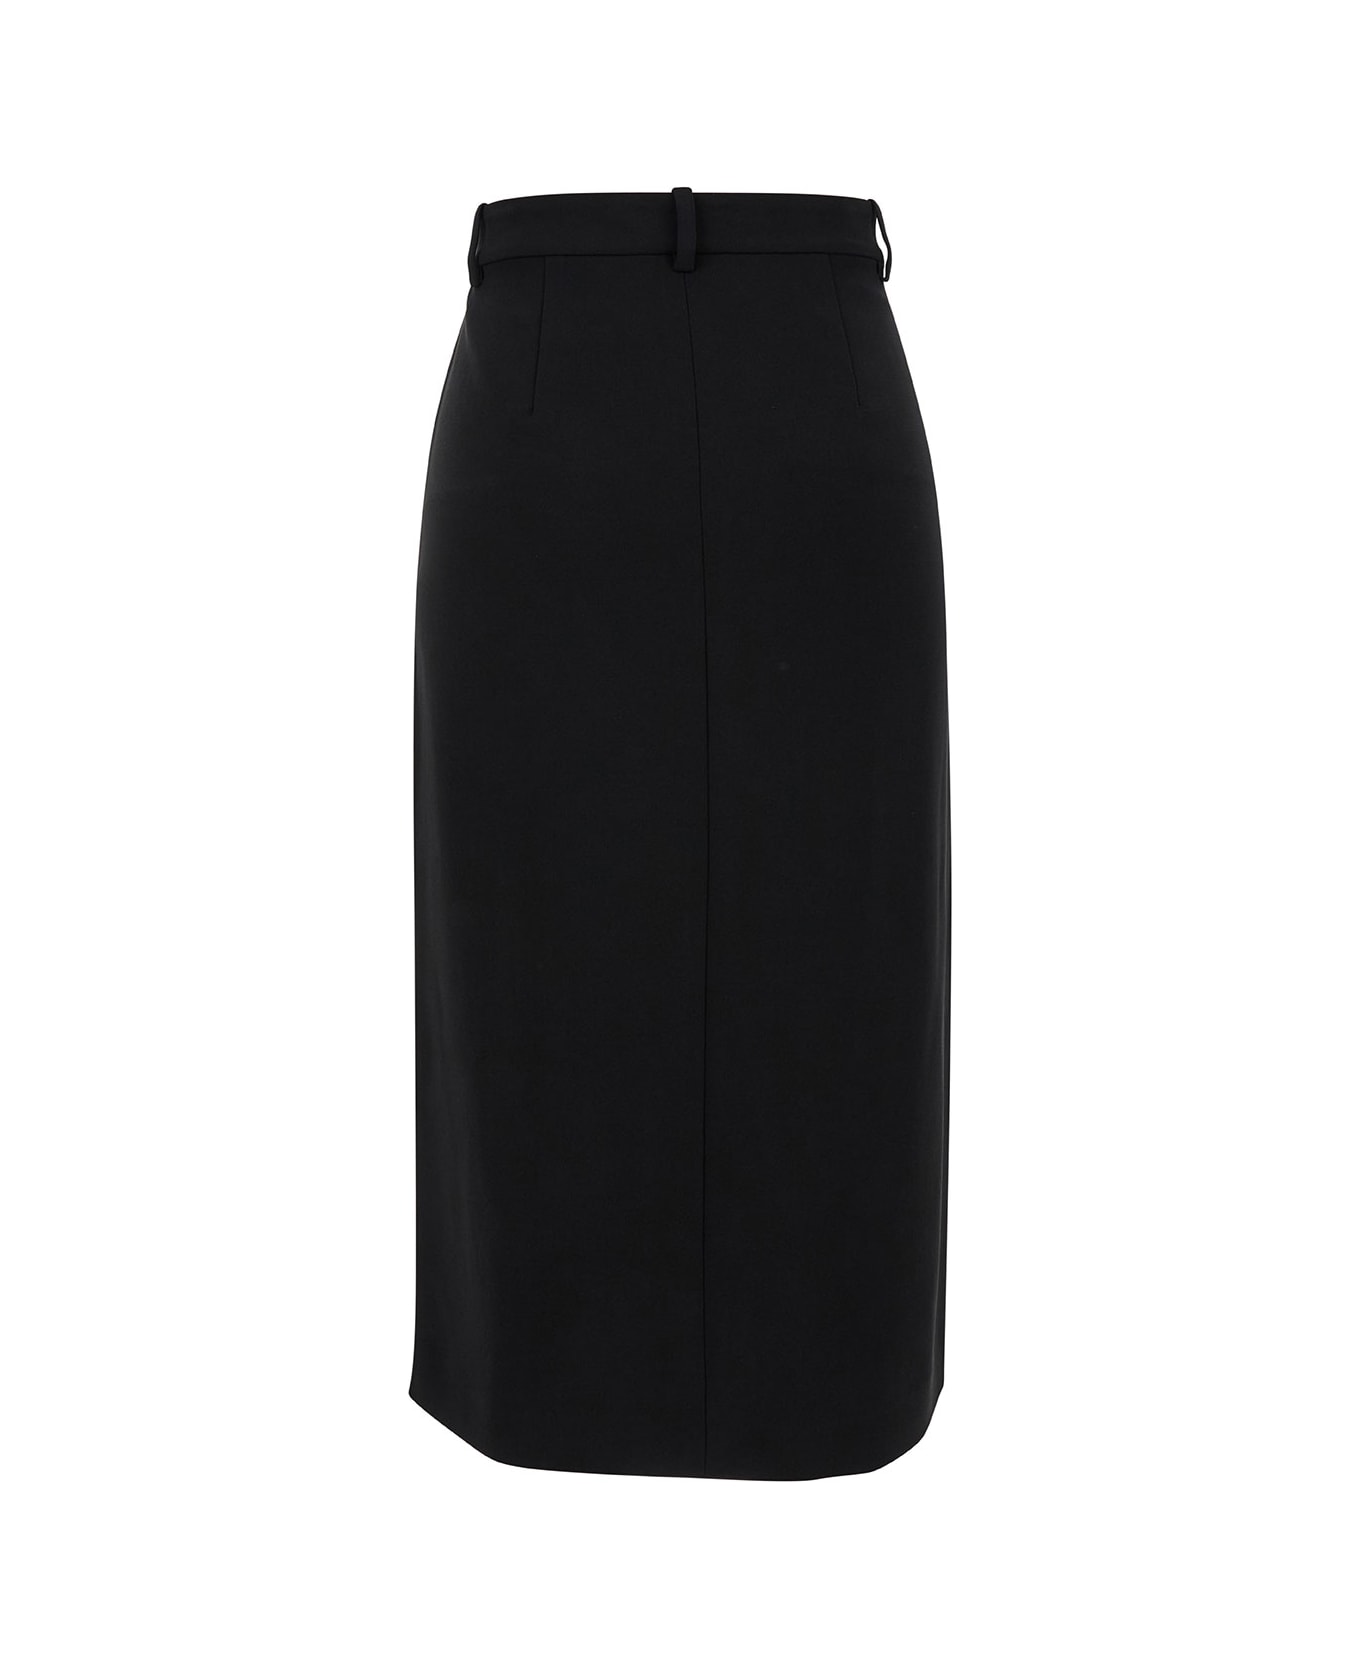 Theory Midi Black Straight Skirt With Front Split In Triacetate Blend Woman - Black